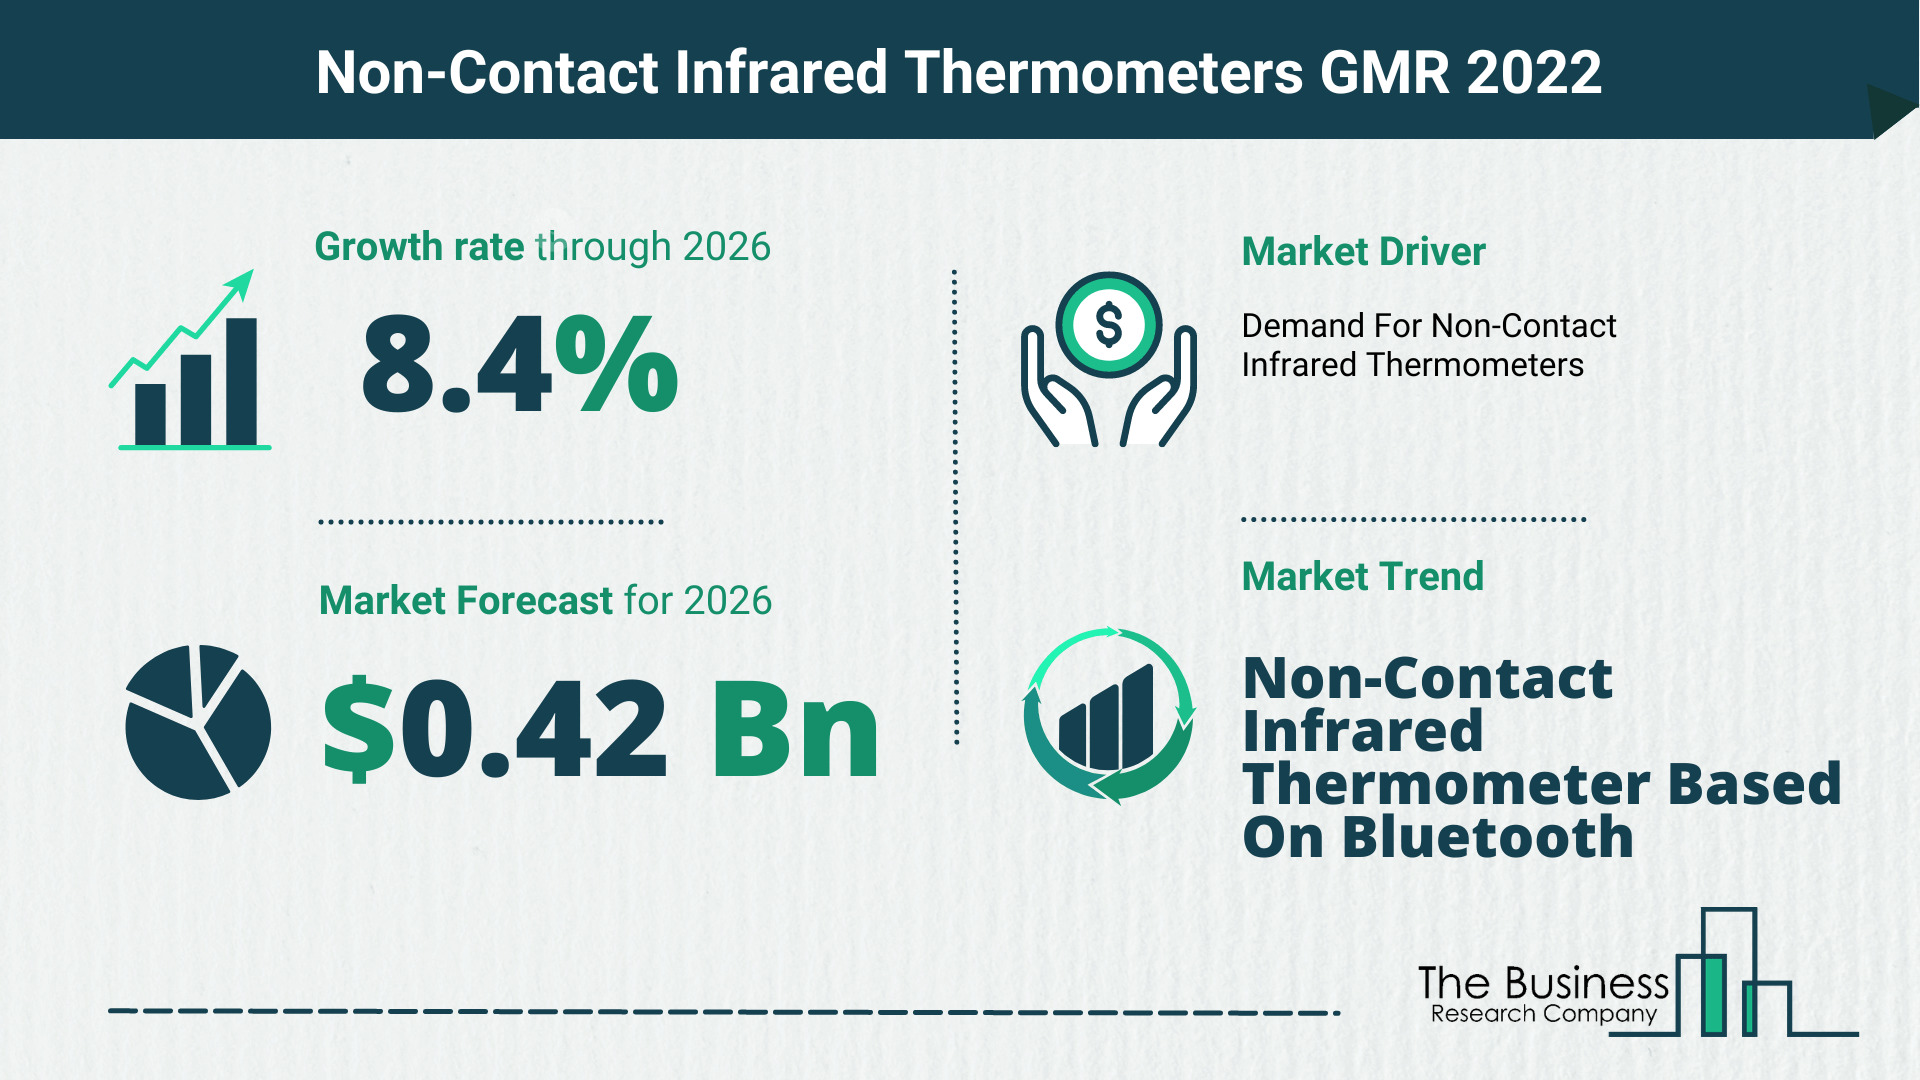 What Is The Non-Contact Infrared Thermometers Market Overview In 2022?